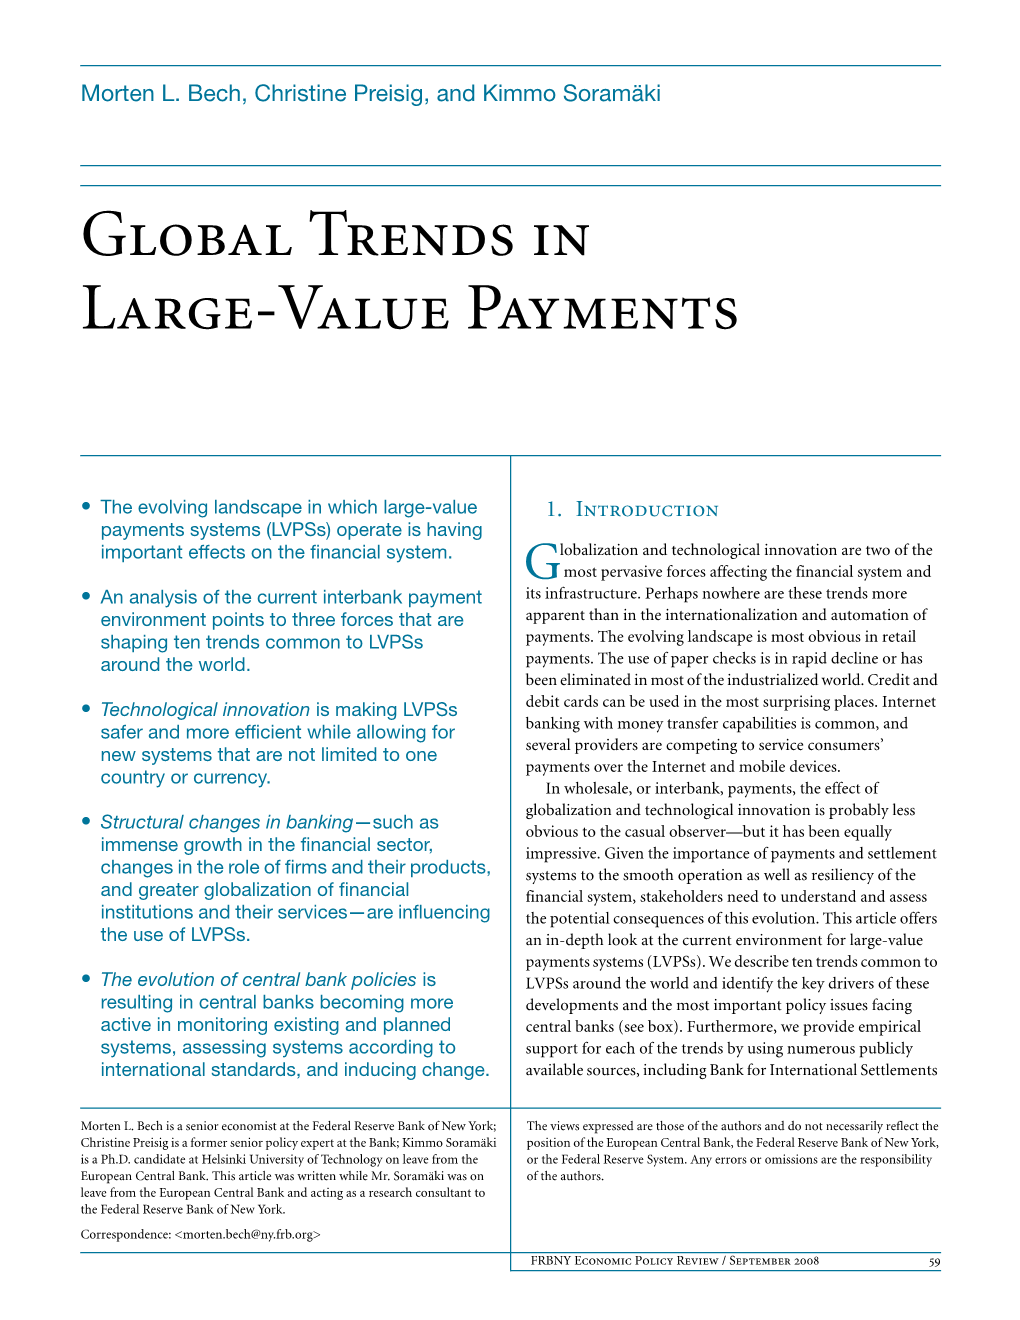 Global Trends in Large-Value Payments